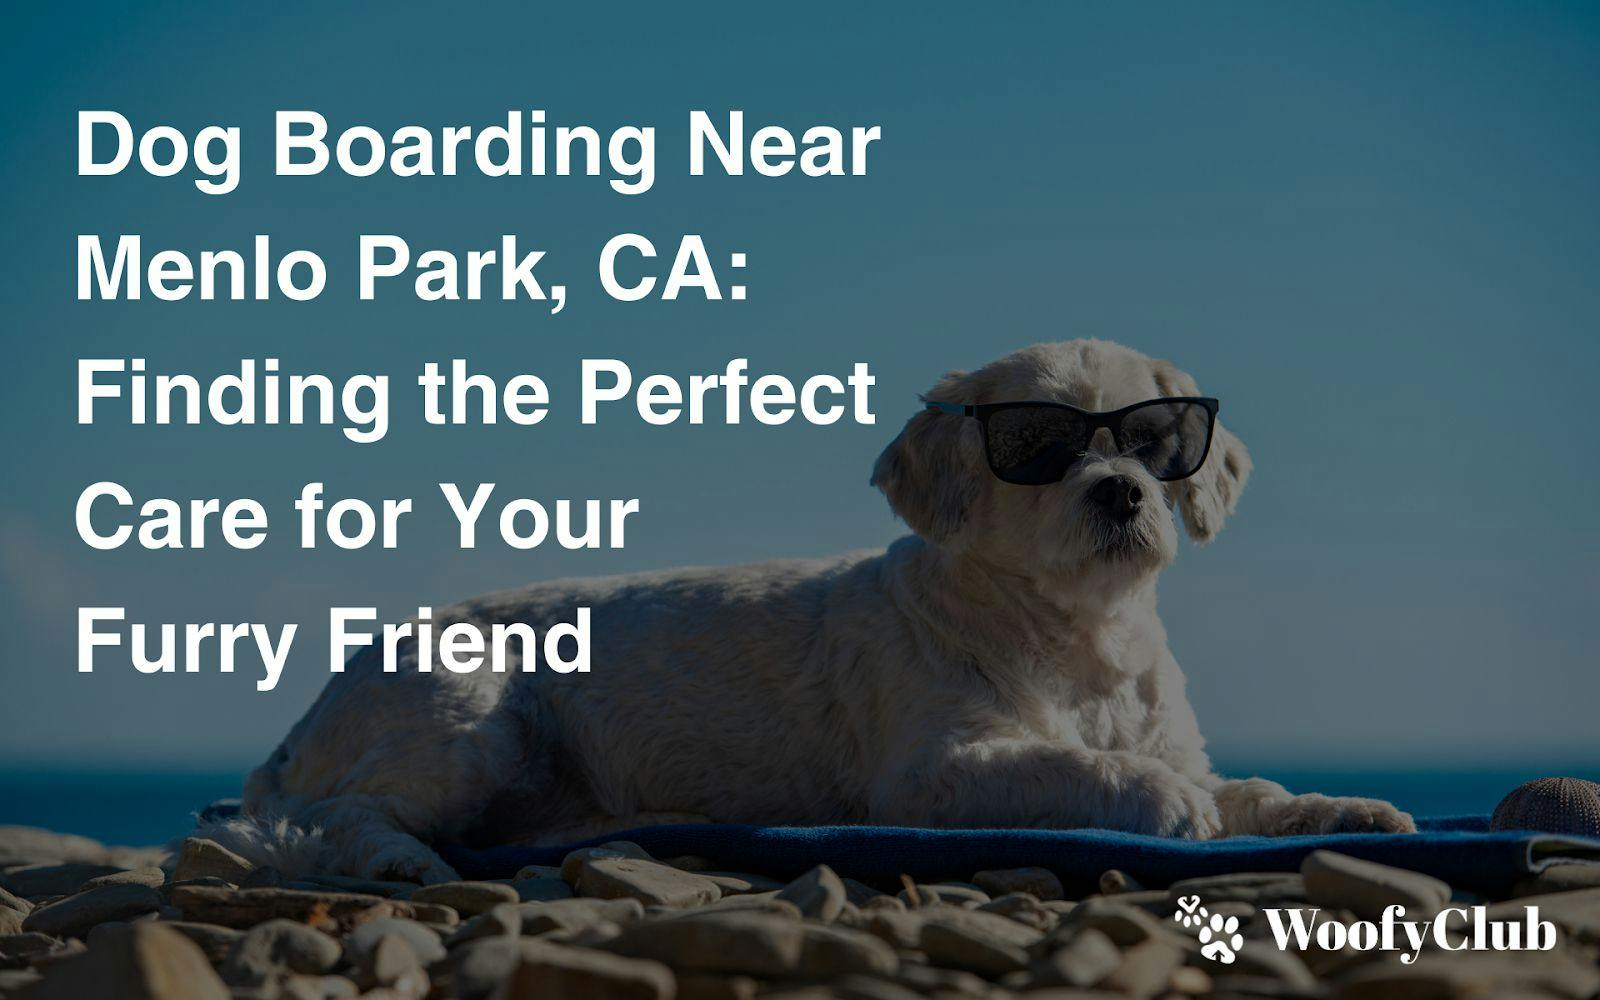 Dog Boarding Near Menlo Park, CA: Finding The Perfect Care For Your Furry Friend